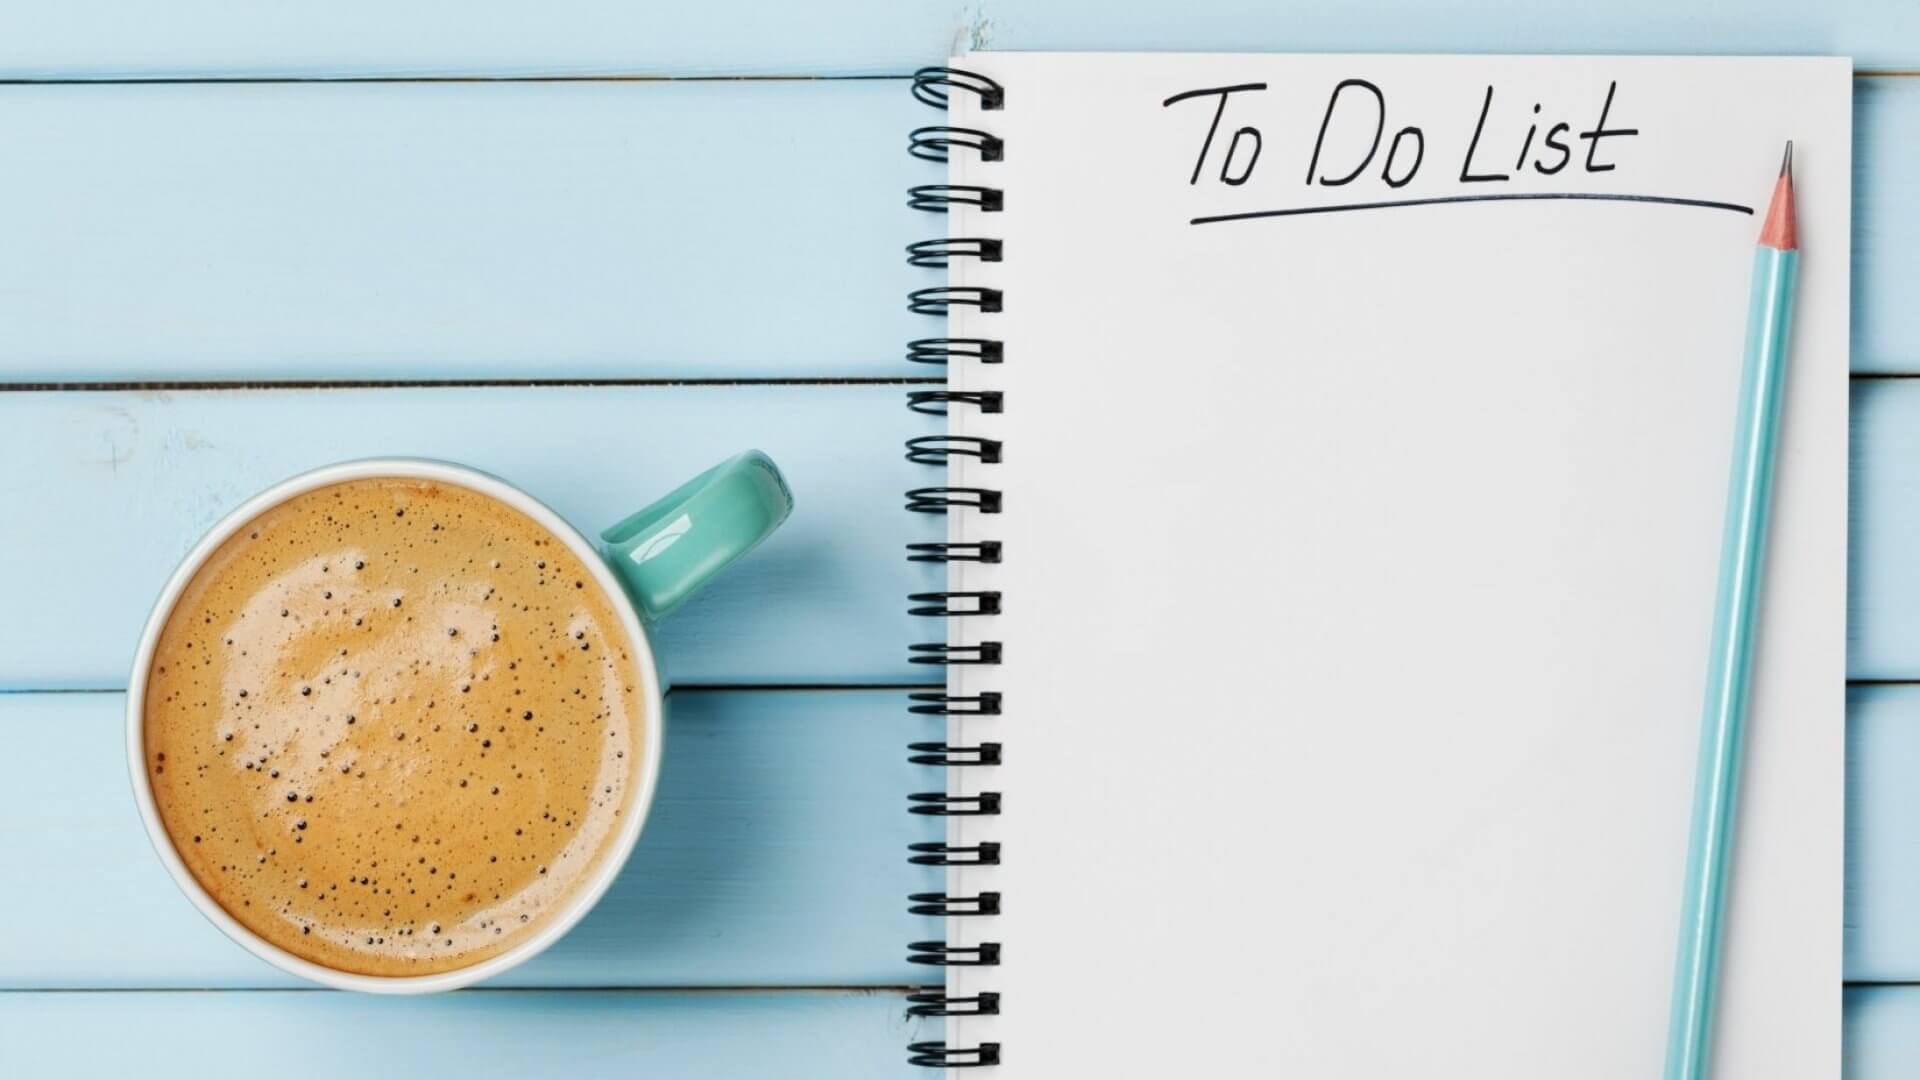 https://www.inc.com/melissa-chu/the-problem-with-to-do-lists-and-what-to-try-instead.html